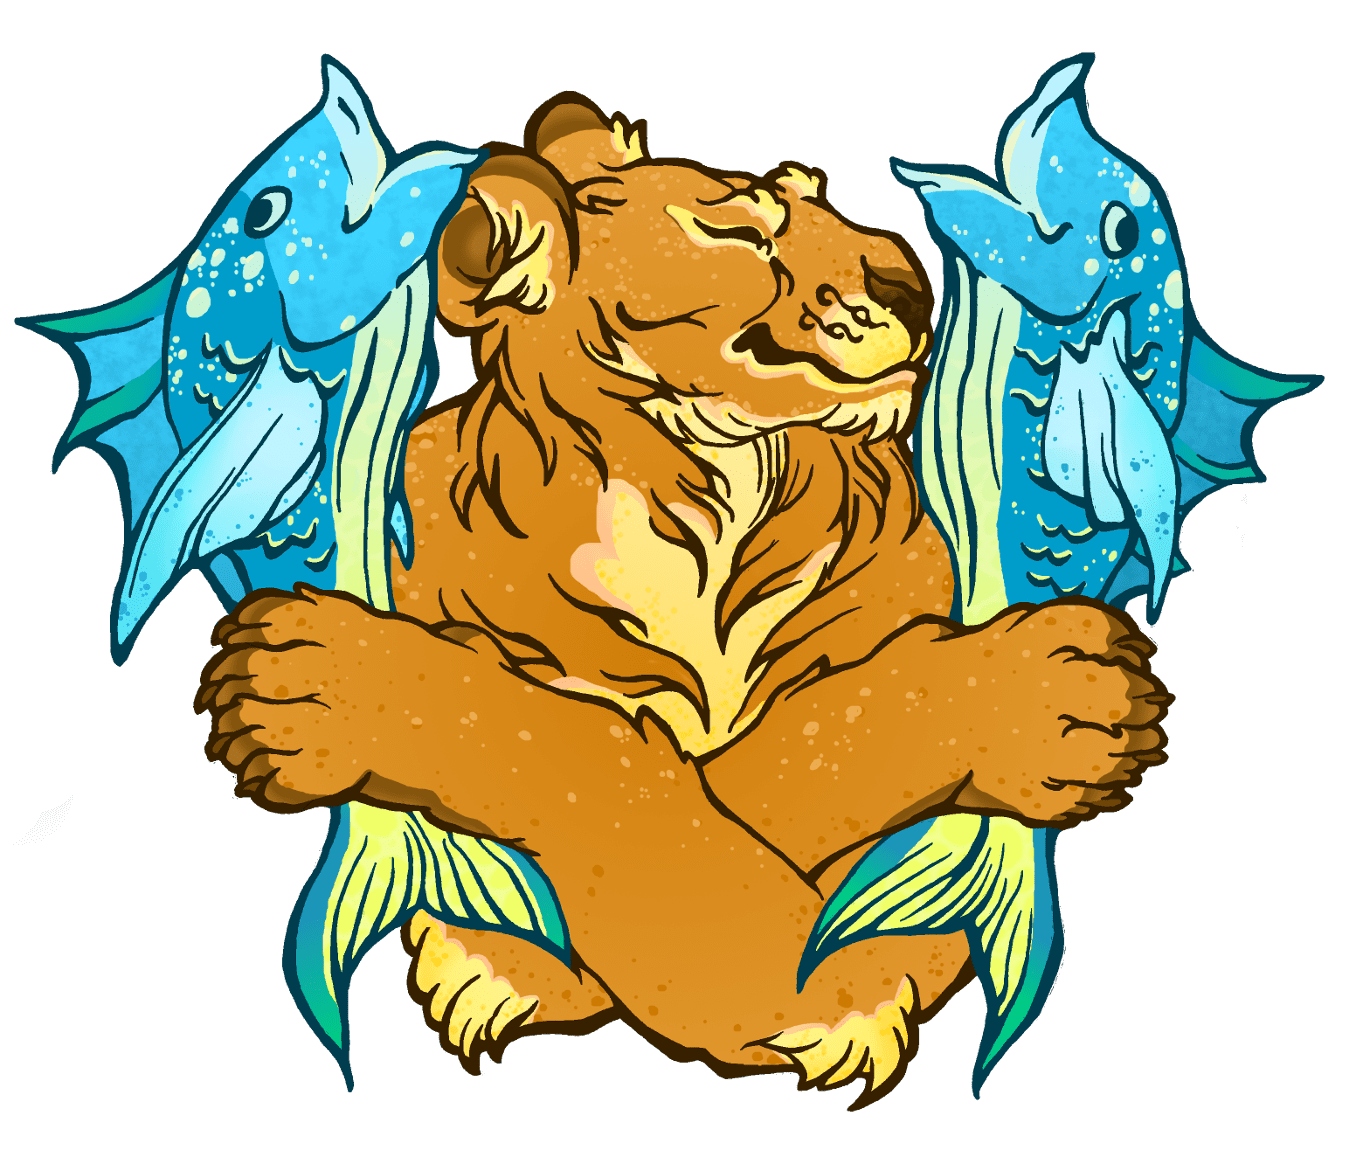 Two Fish and a Lion